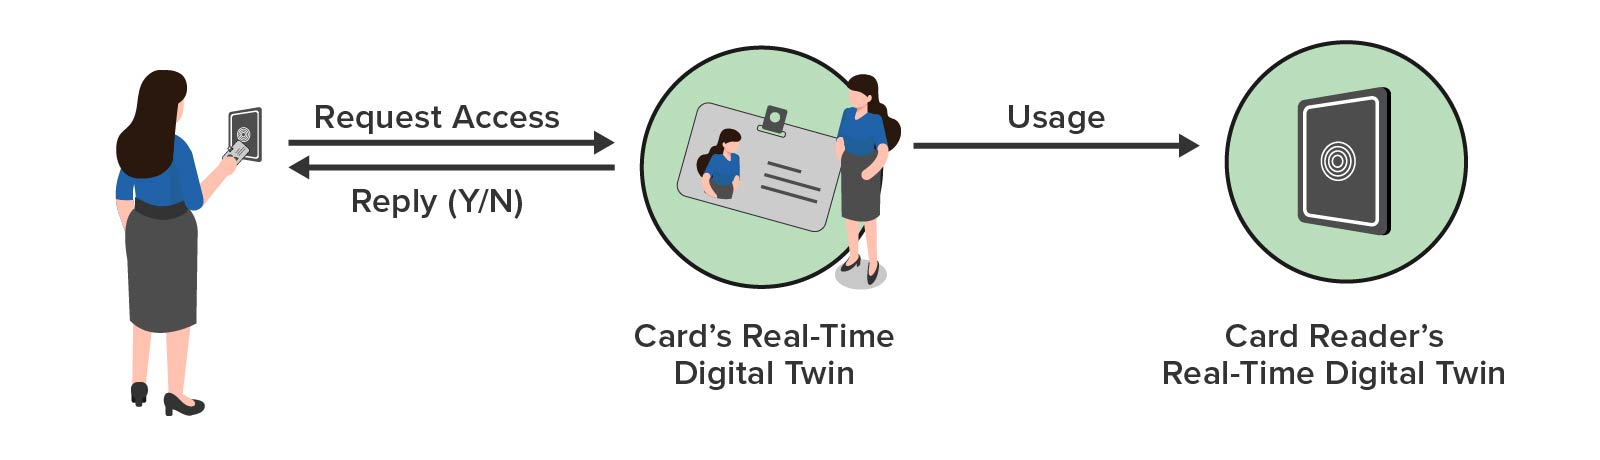 Scenario of using real-time digital twins for access control and usage tracking